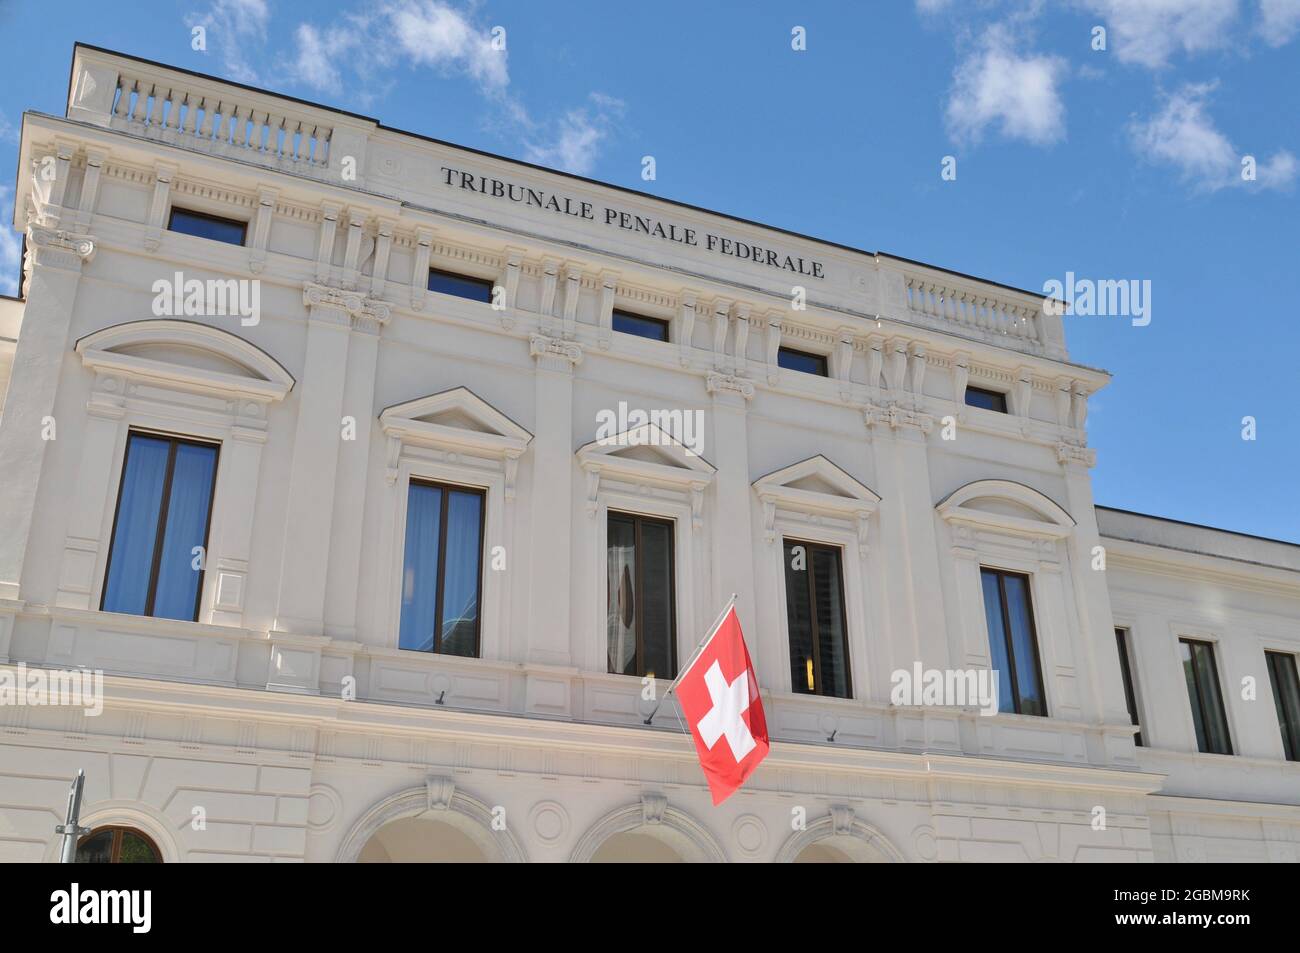 View of the Federal Criminal Court building facade located in Bellinzona, Switzerland Stock Photo